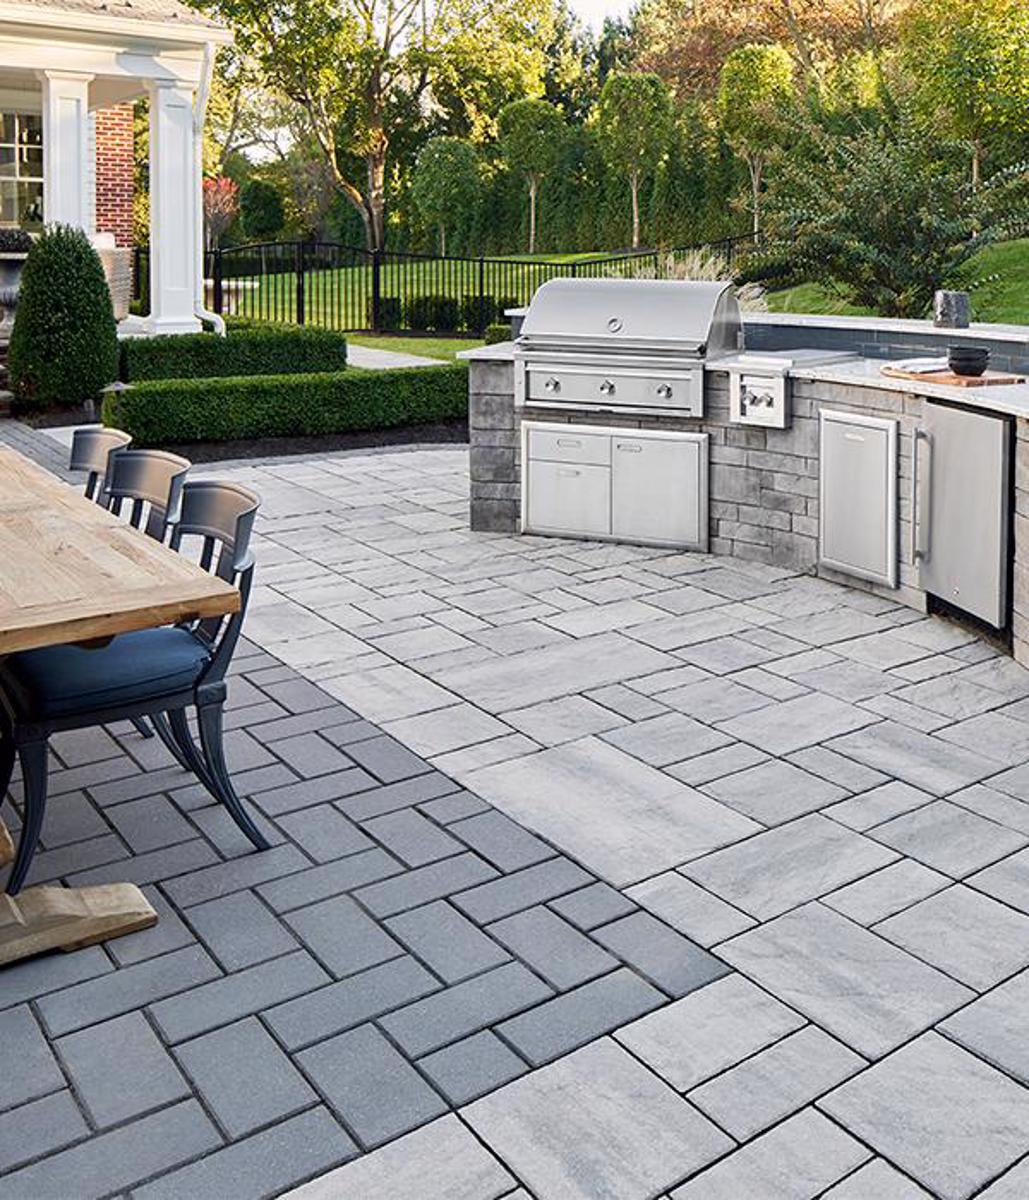 Techo bloc by space outdoor kitchens backyard bbq grill walls slabs grey black 1